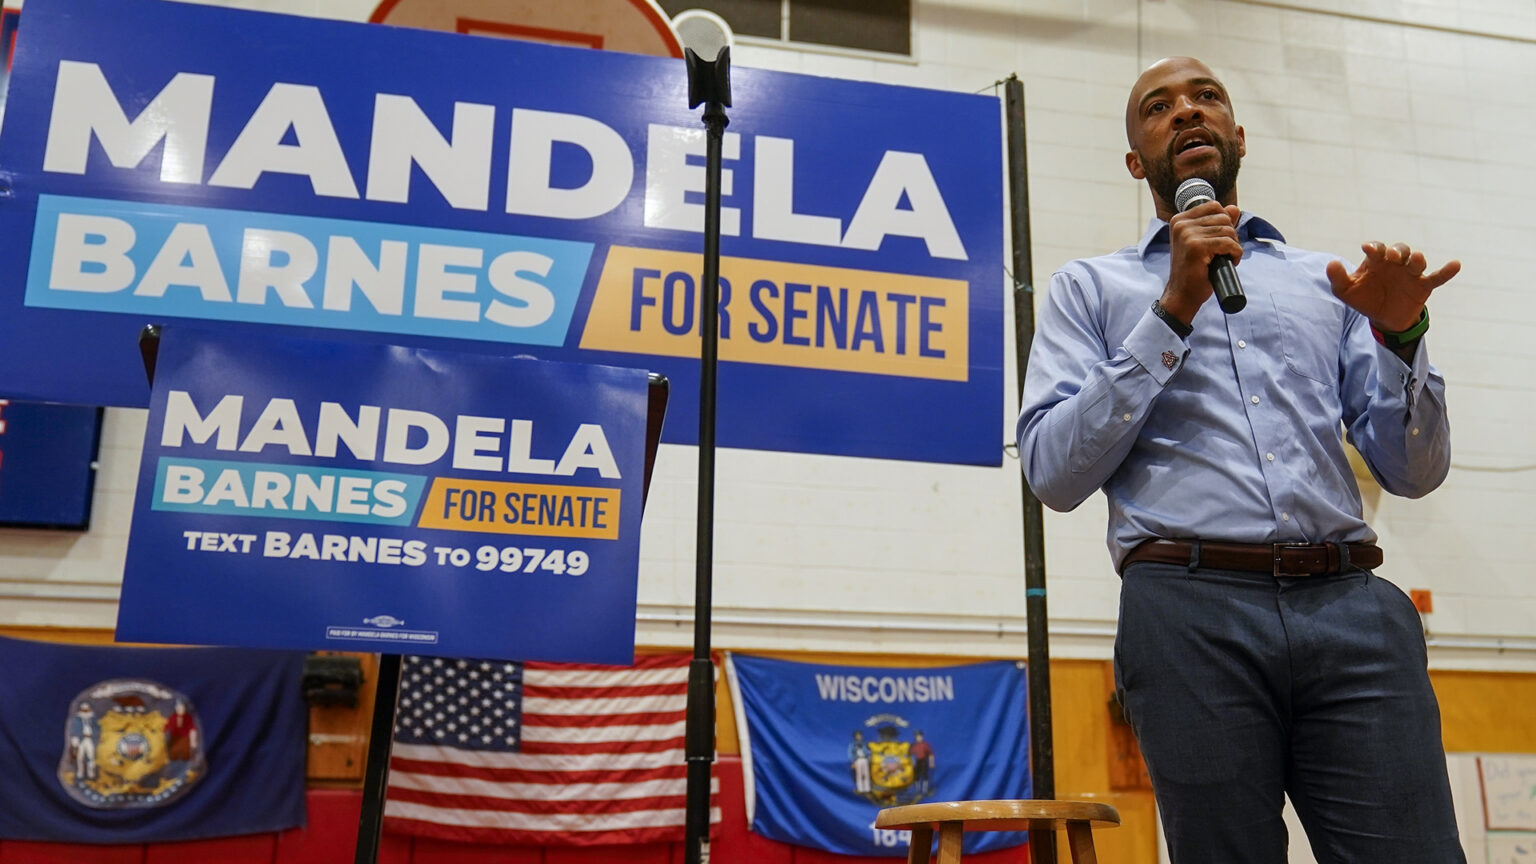 Mandela Barnes stands and speaks into a wireless microphone in a gymnasium, with signs reading Mandela Barnes for Senate and the U.S. and Wisconsin flags in the background.